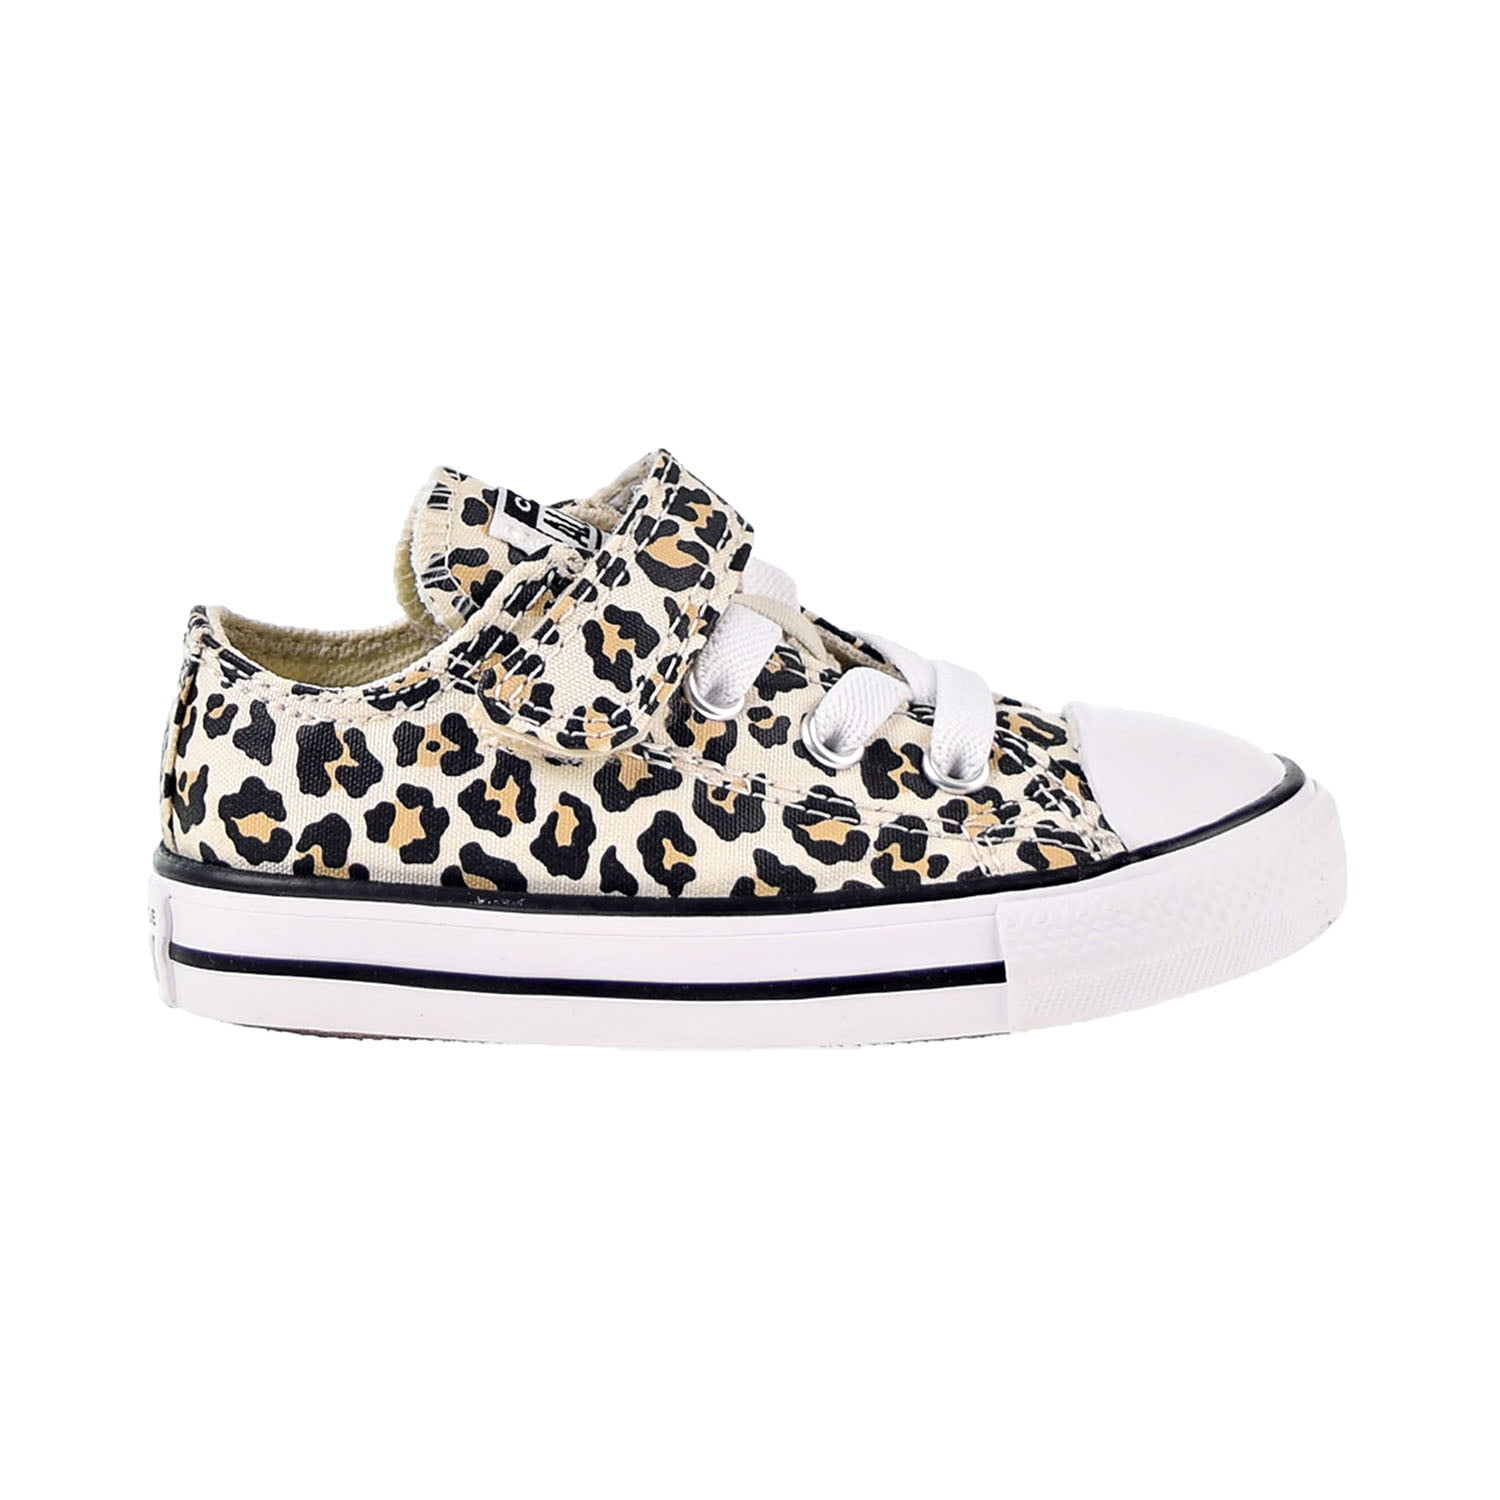 Converse Chuck Taylor All Star Leopard Print Toddler's Shoes Black-Beige  766298f 